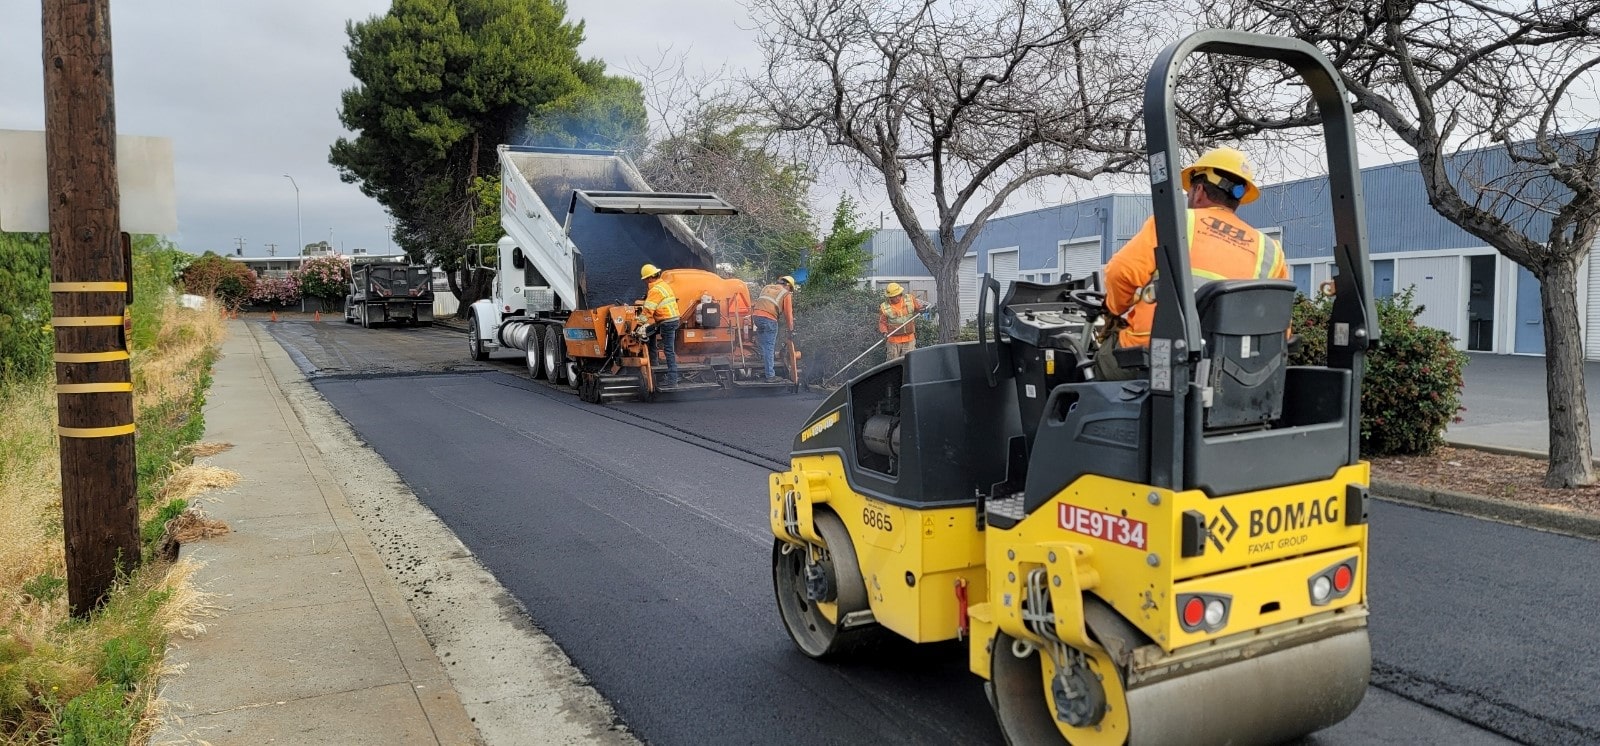 paving company laying asphalt for new road and smoothing with roller